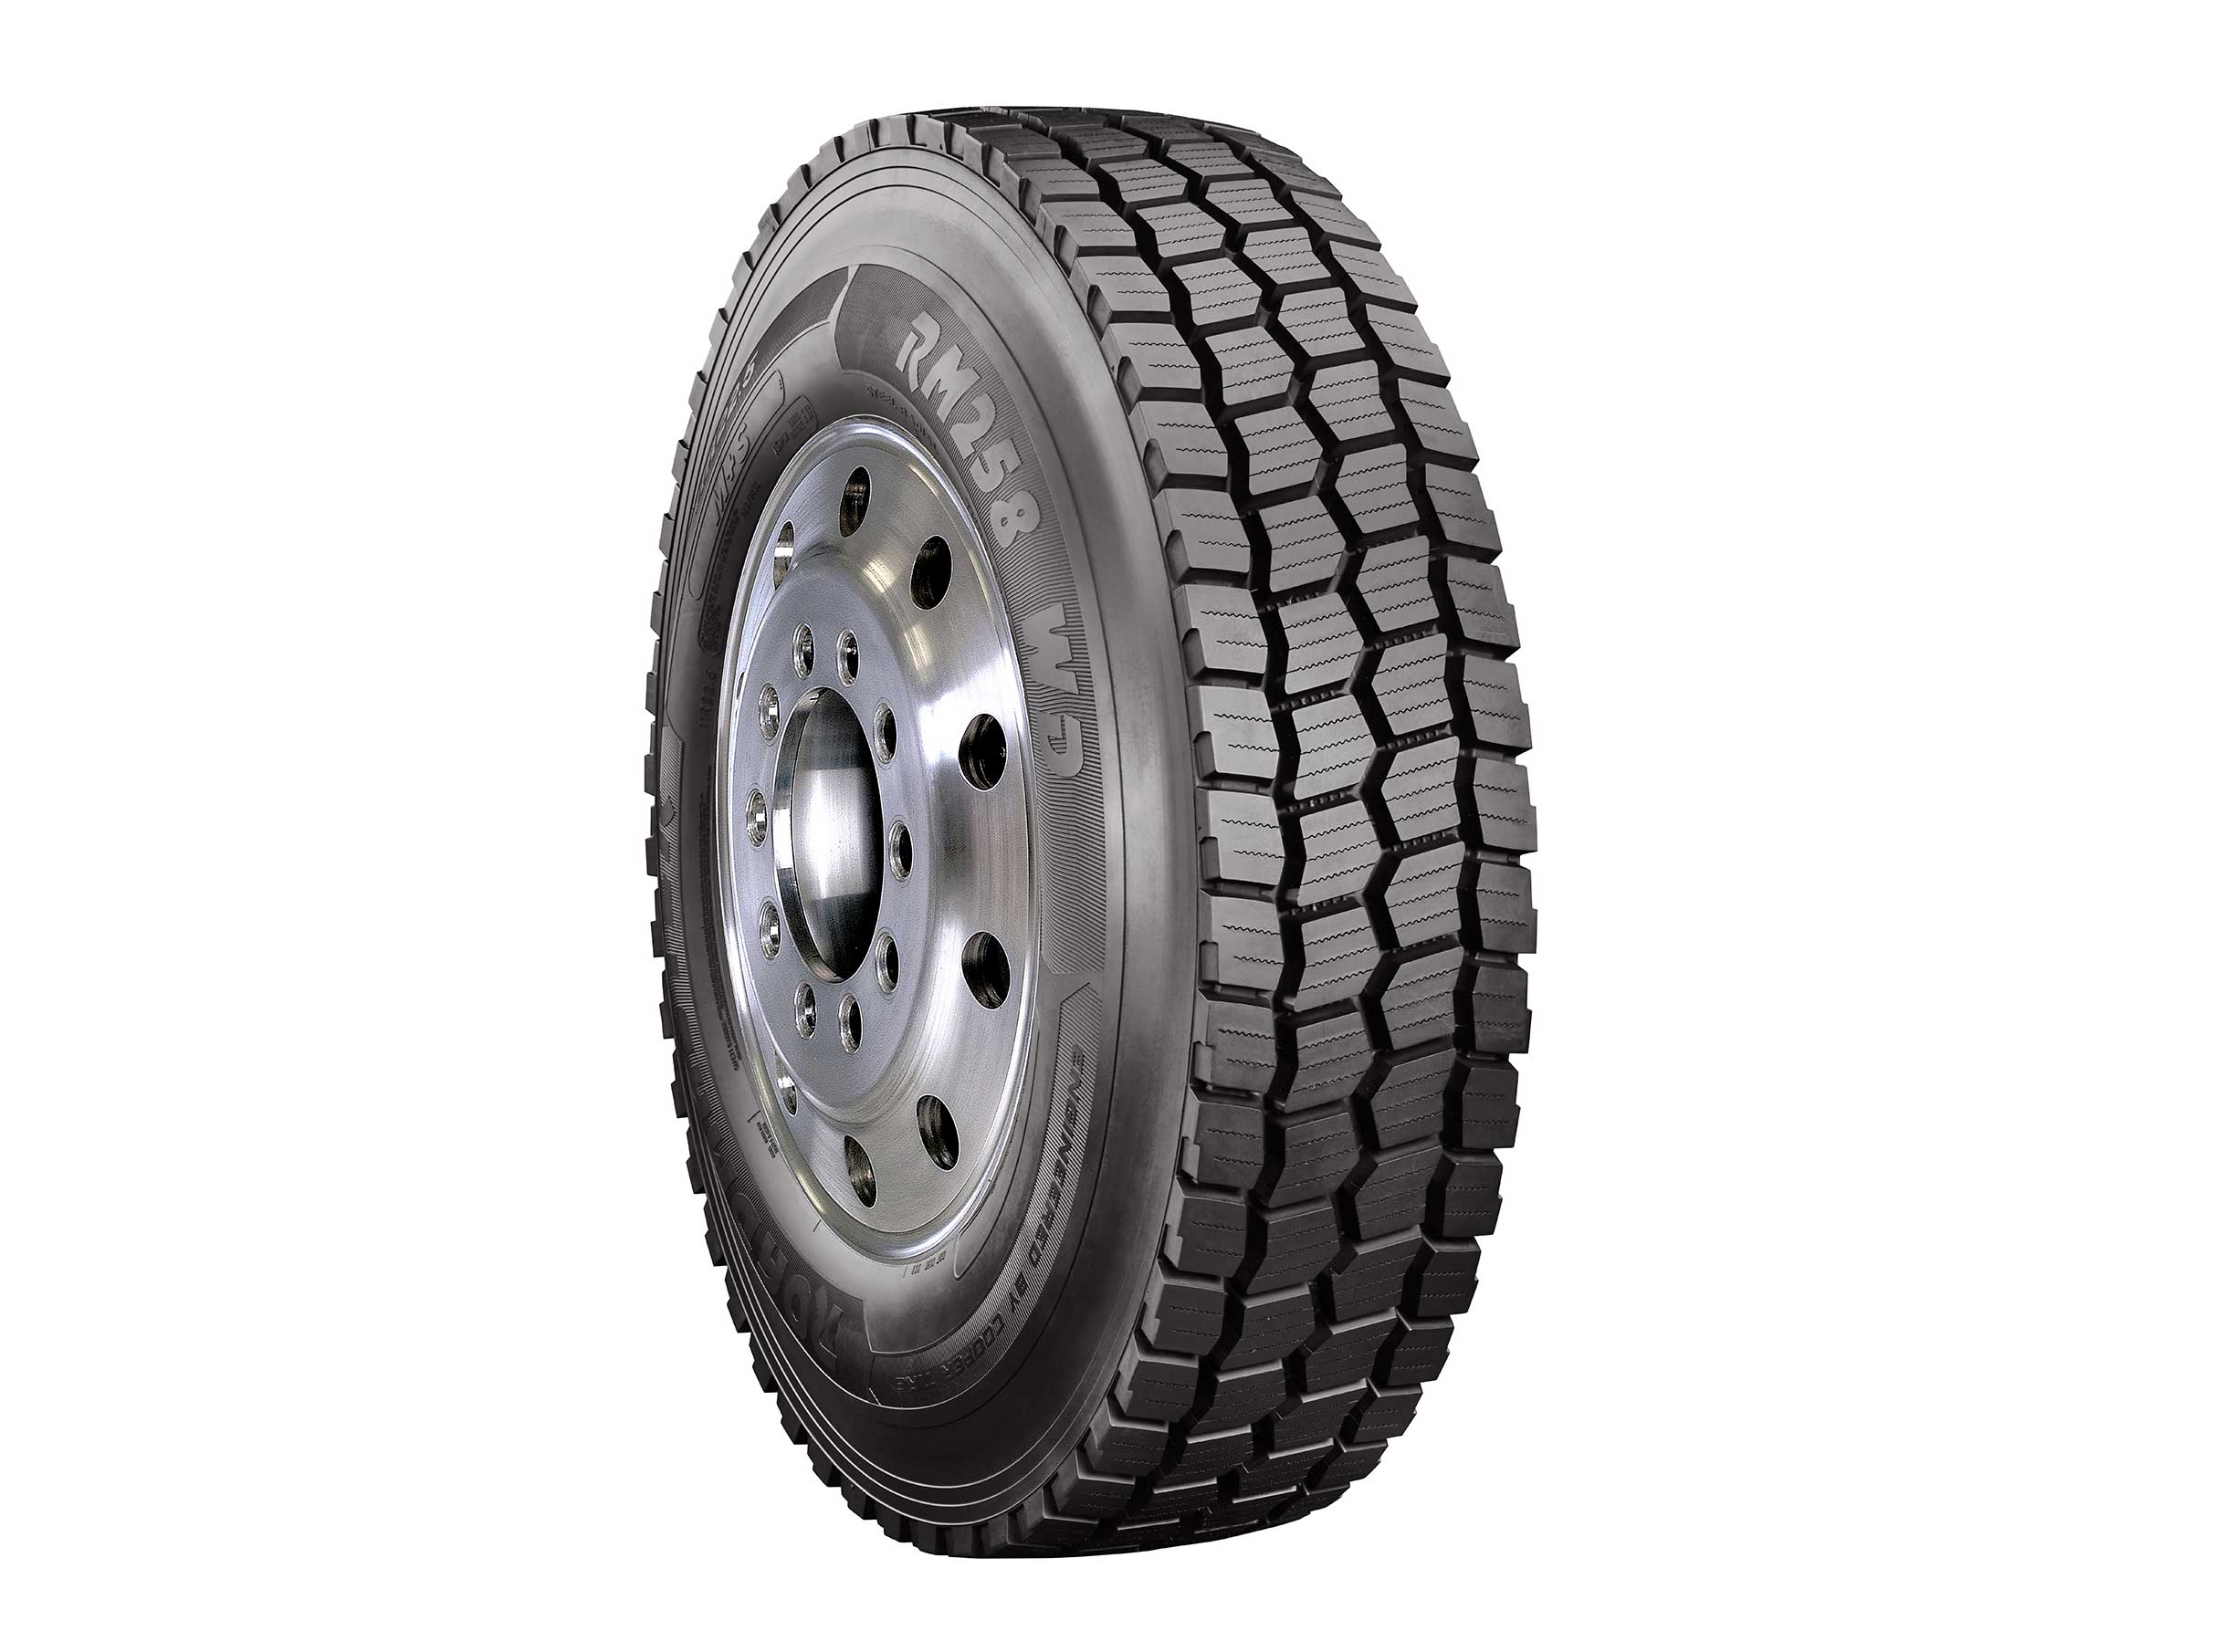 Cooper Tire Launches New Roadmaster RM258 WD™ Winter Drive Tire for Regional Haulers